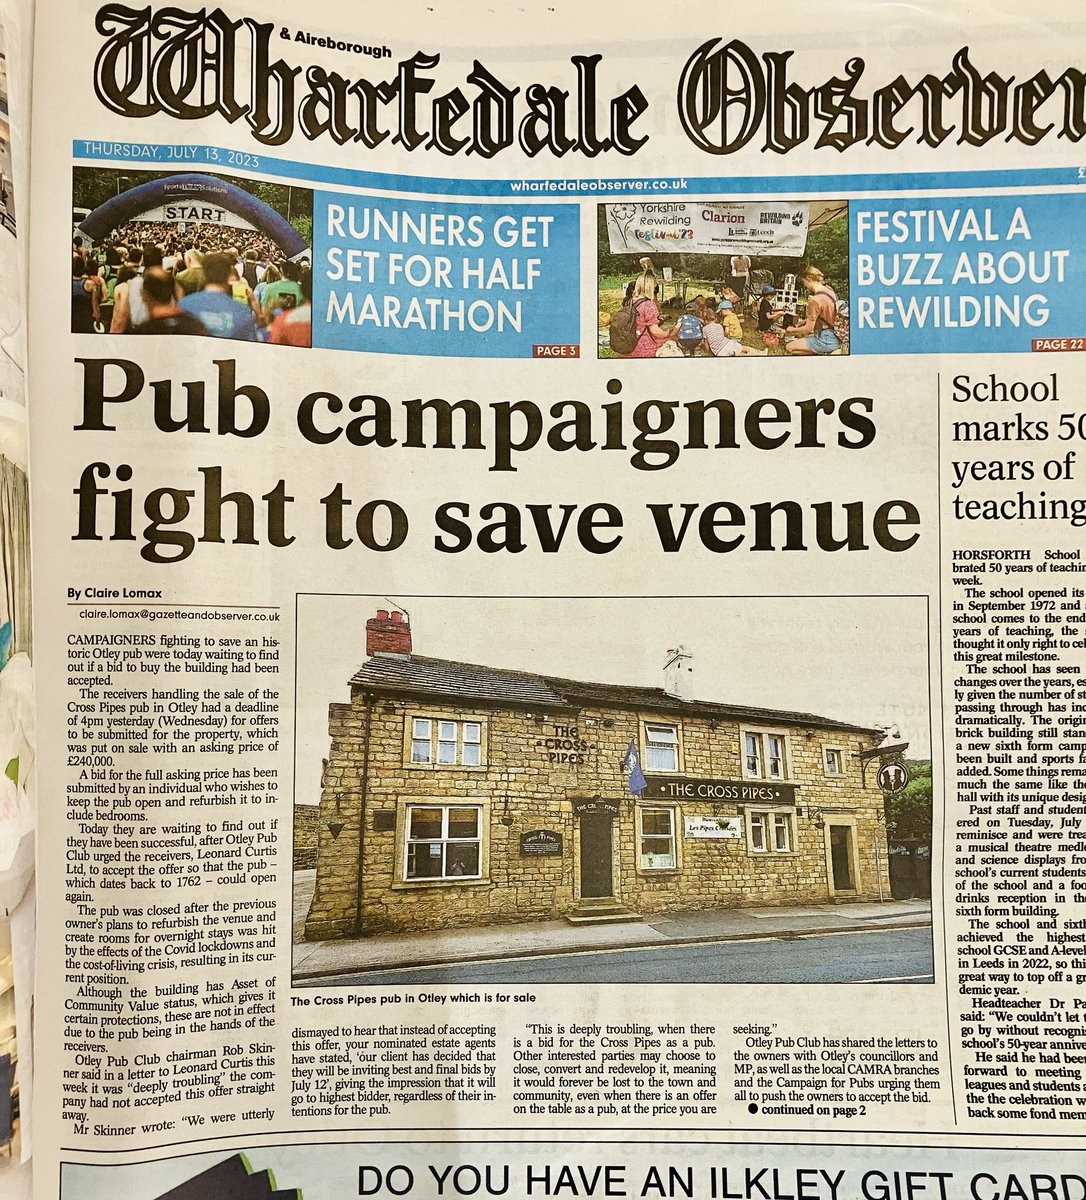 Great #frontpage of the @wharfeobserver about the #CrossPipes #Otley & #OtleyPubClub urging #LeonardCurtis & @WalkerSingleton to do the right thing & sell it as a #pub. 

Still no news on their decision…🤞

wharfedaleobserver.co.uk/news/23645993.…

#SavetheCrossPipes #SaveOurPubs #pubs